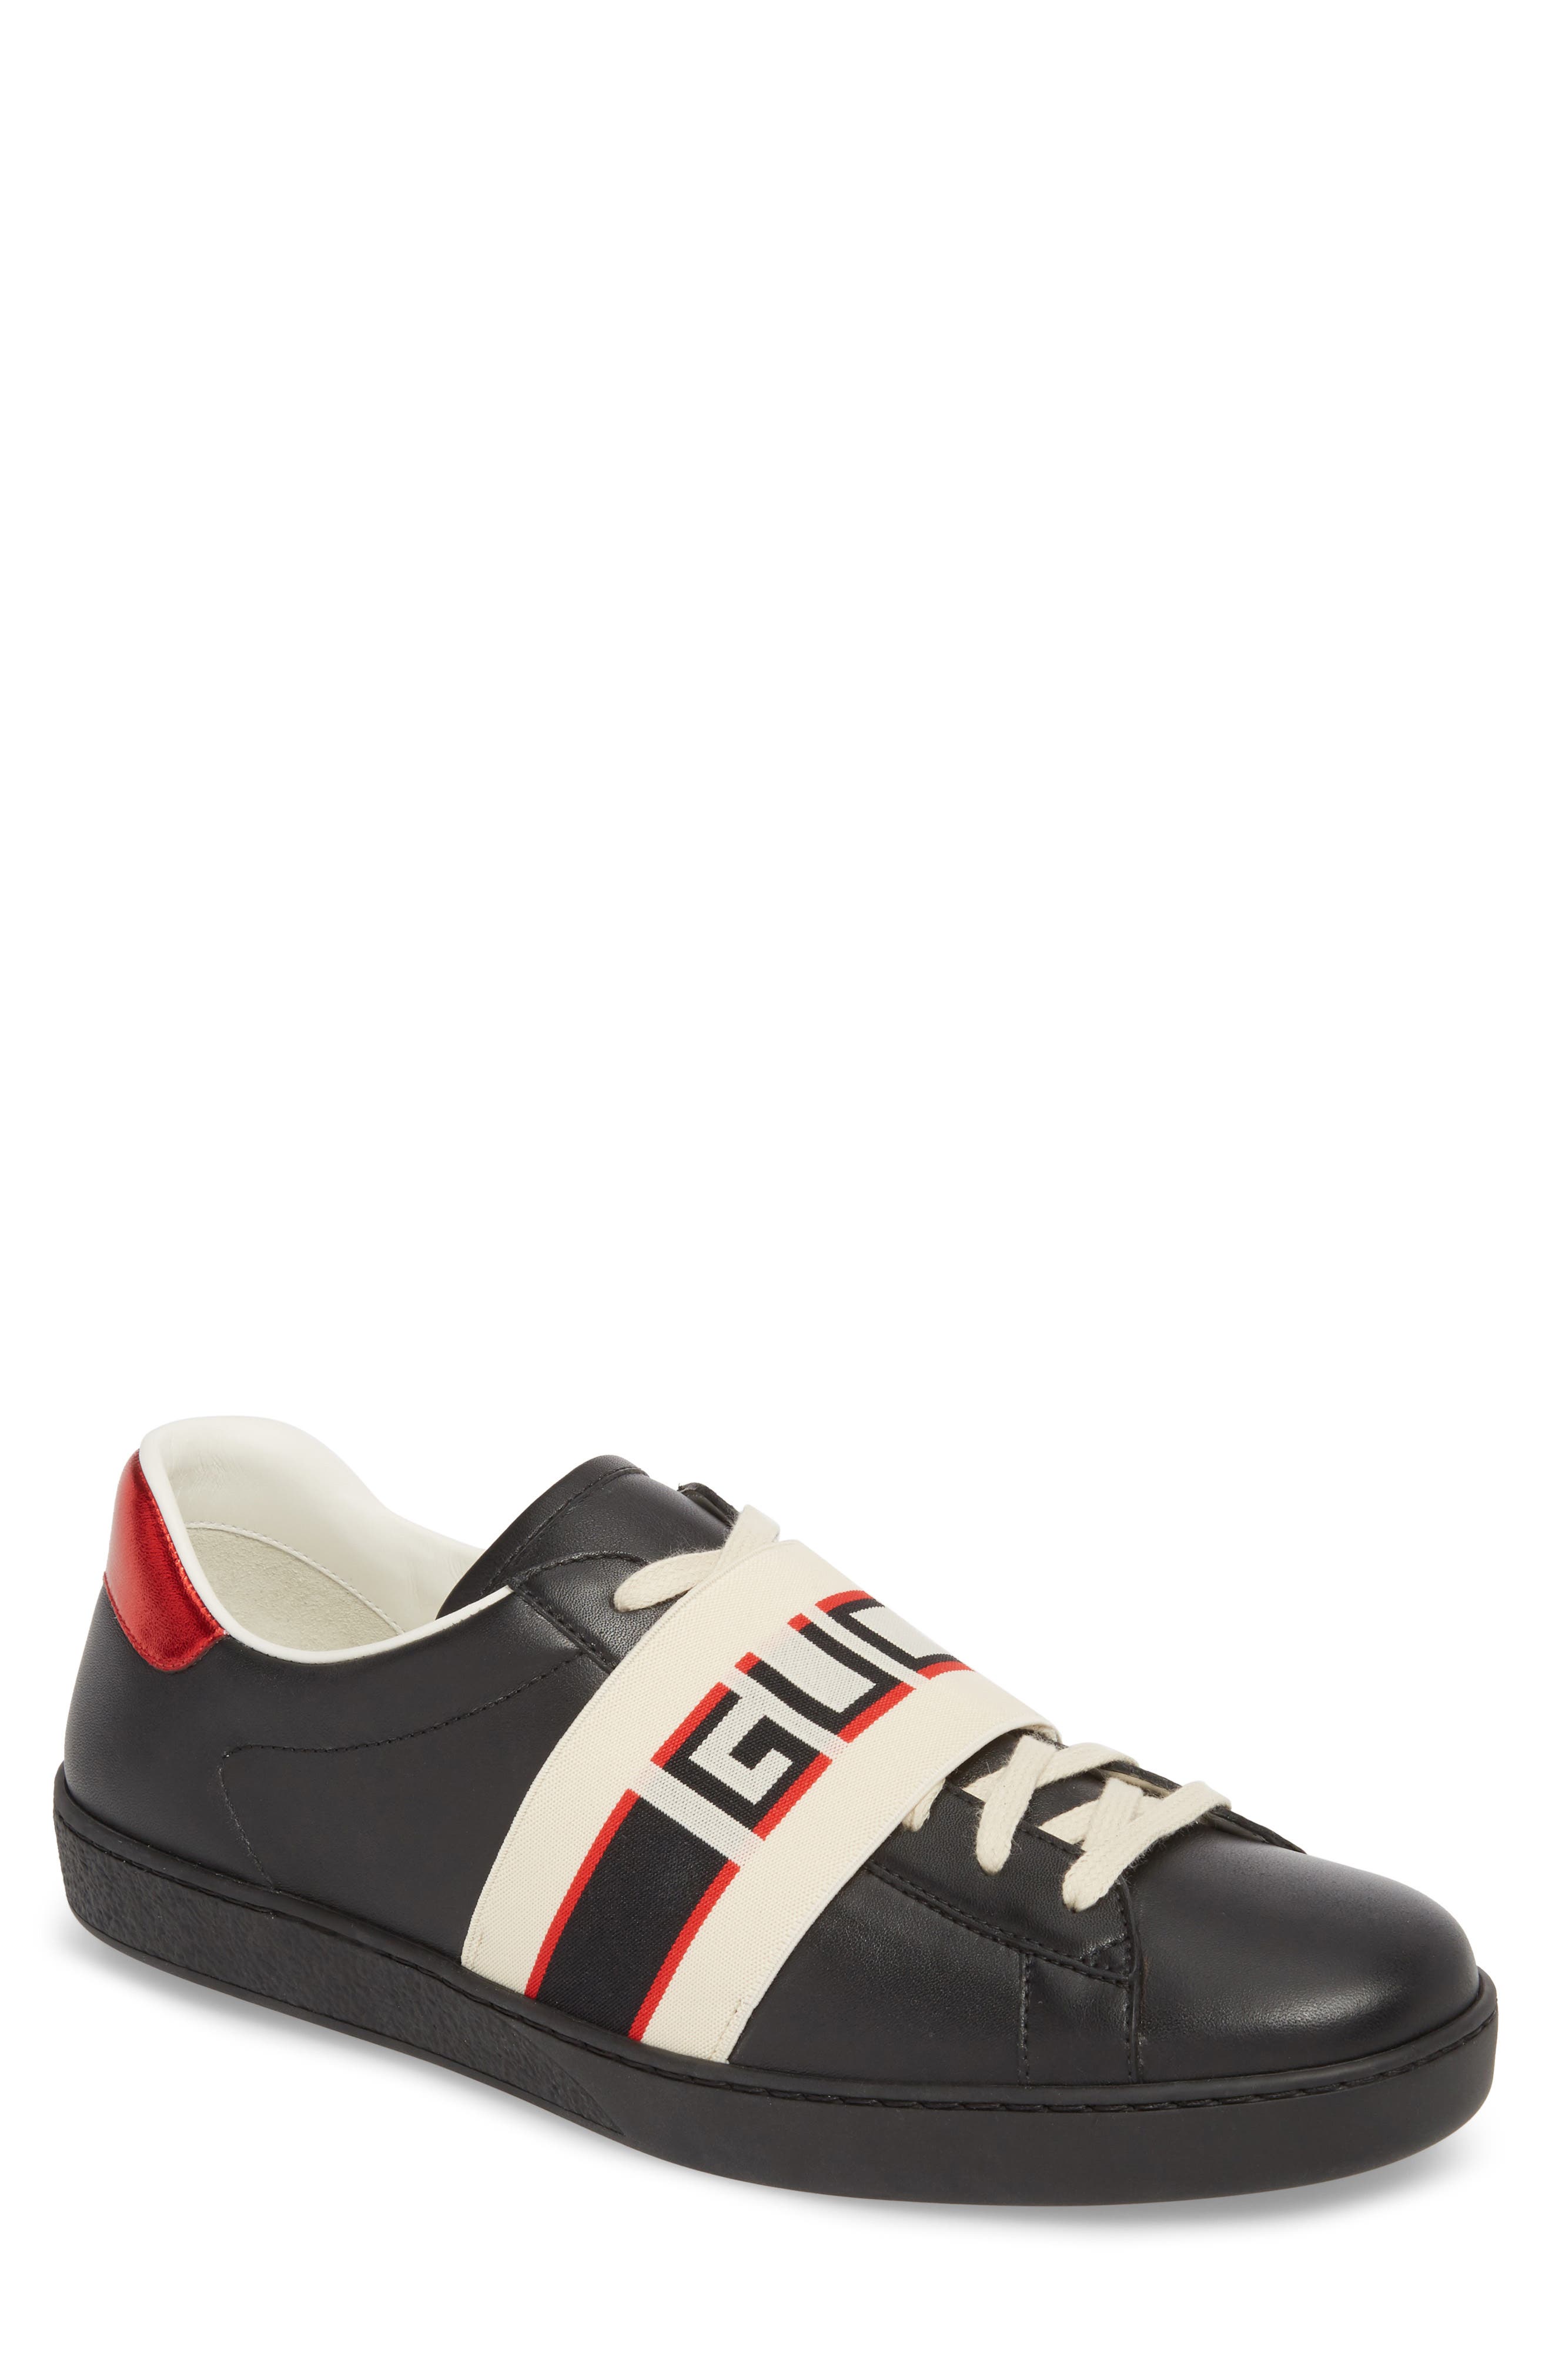 Gucci New Ace Stripe Leather Sneaker 